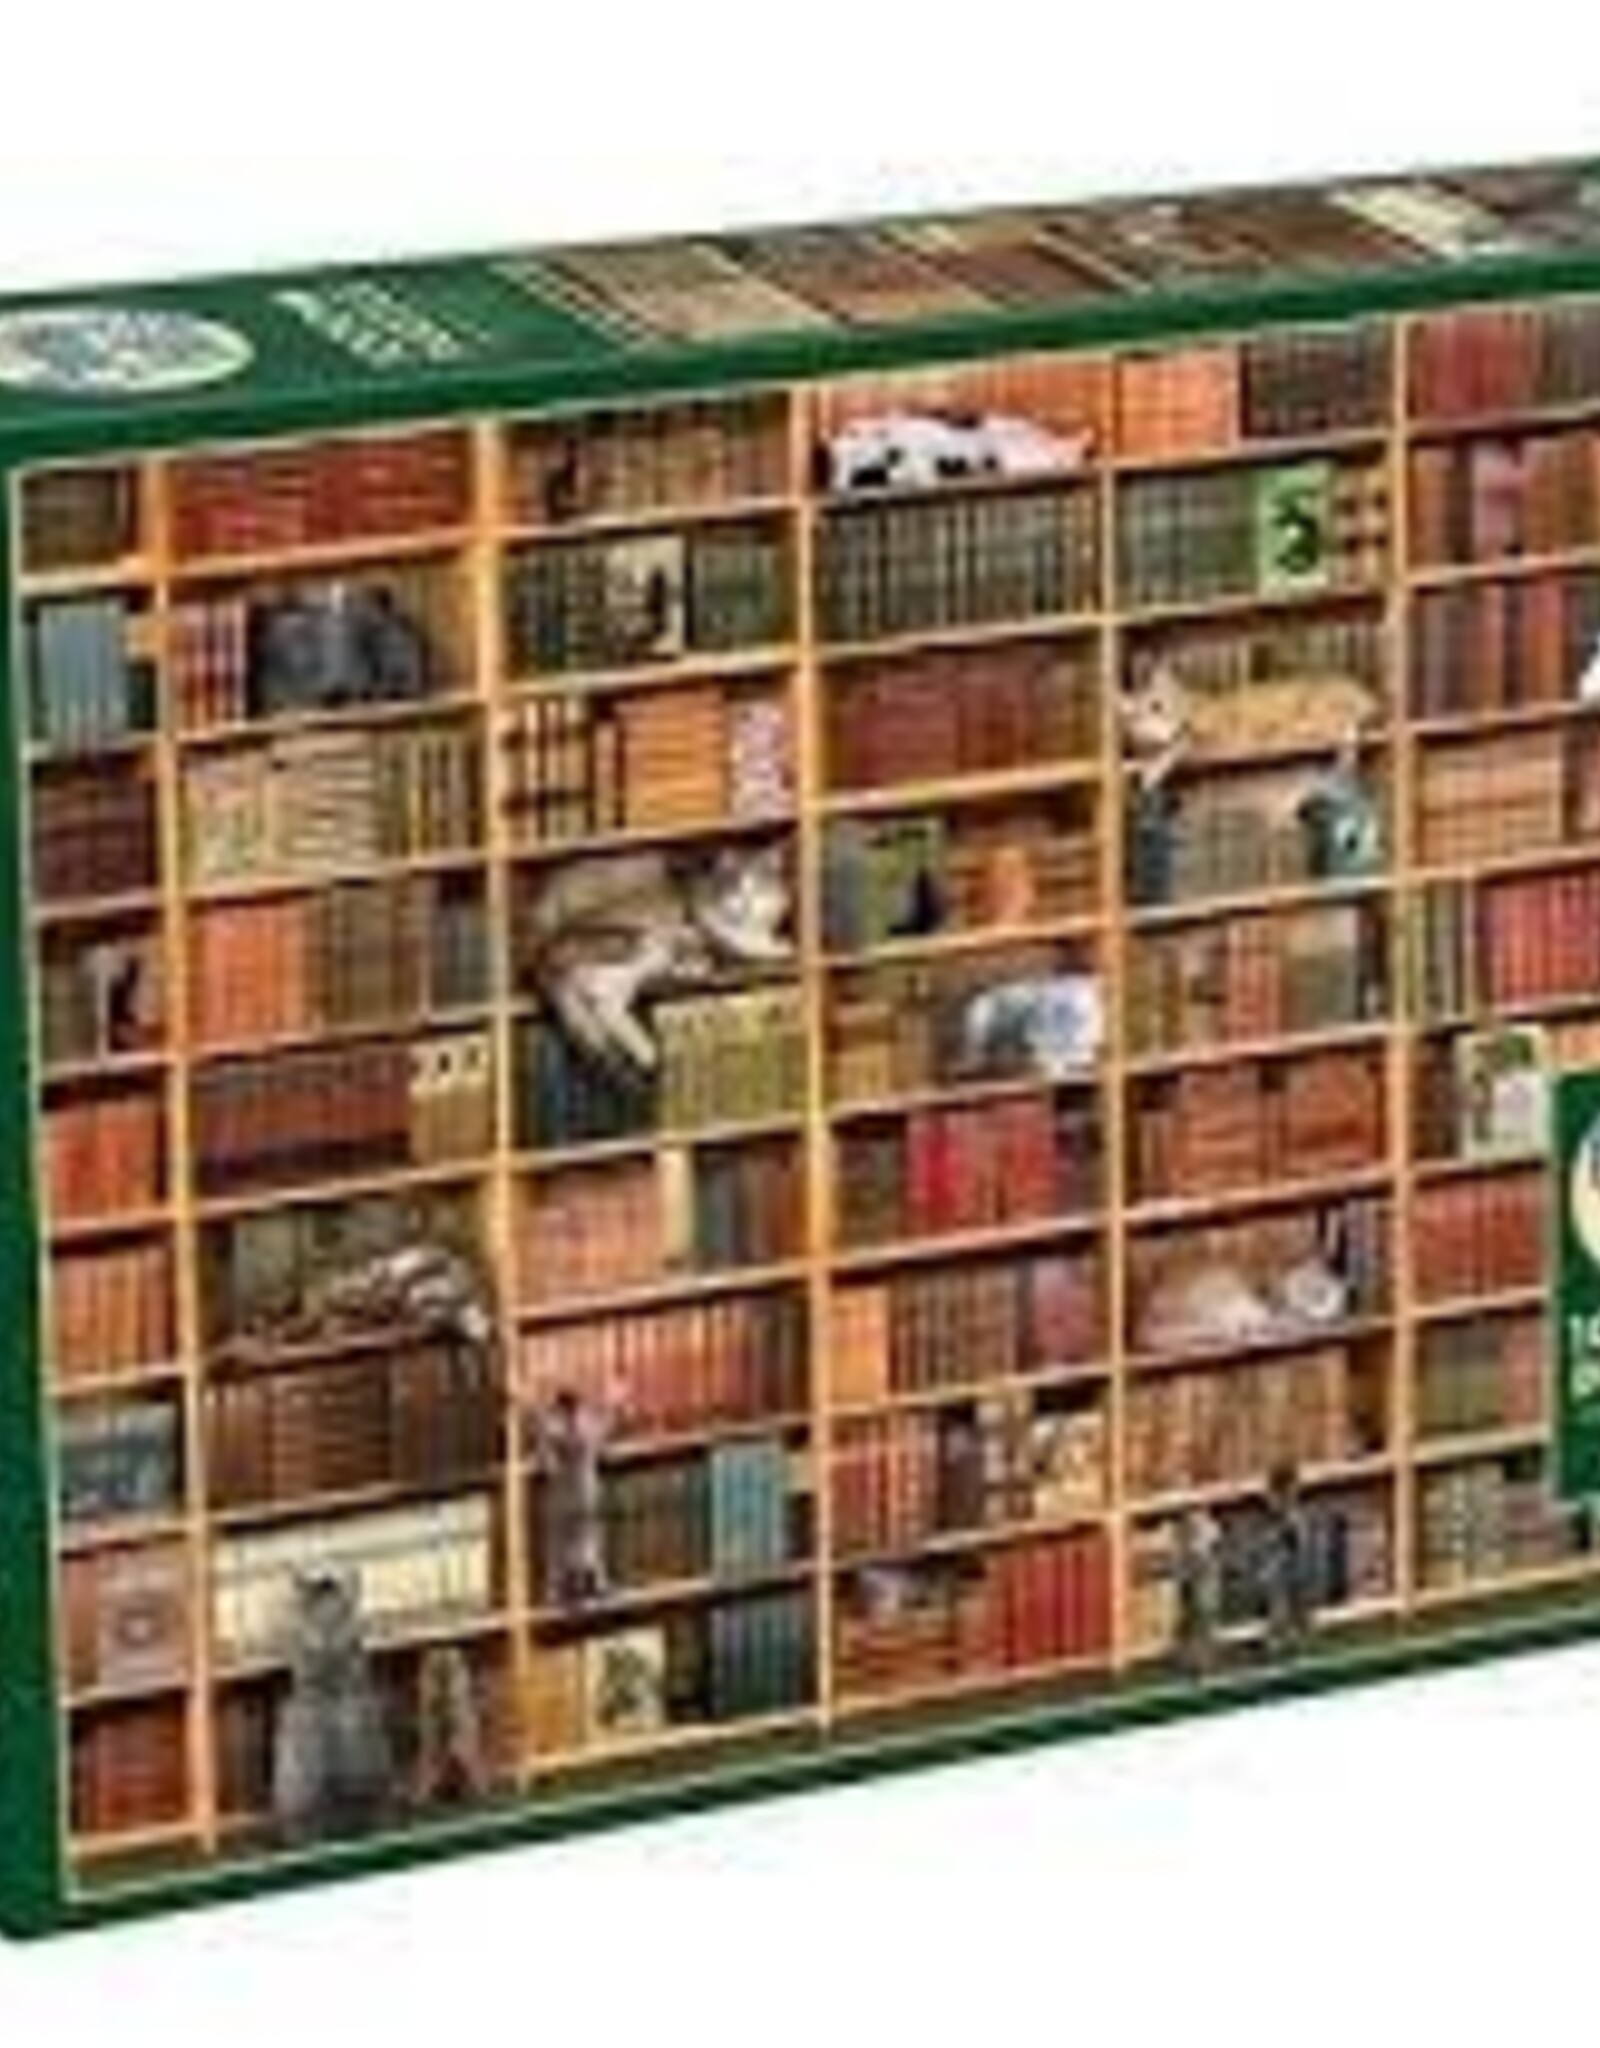 Cobble Hill The Cat Library 1000pc Puzzle